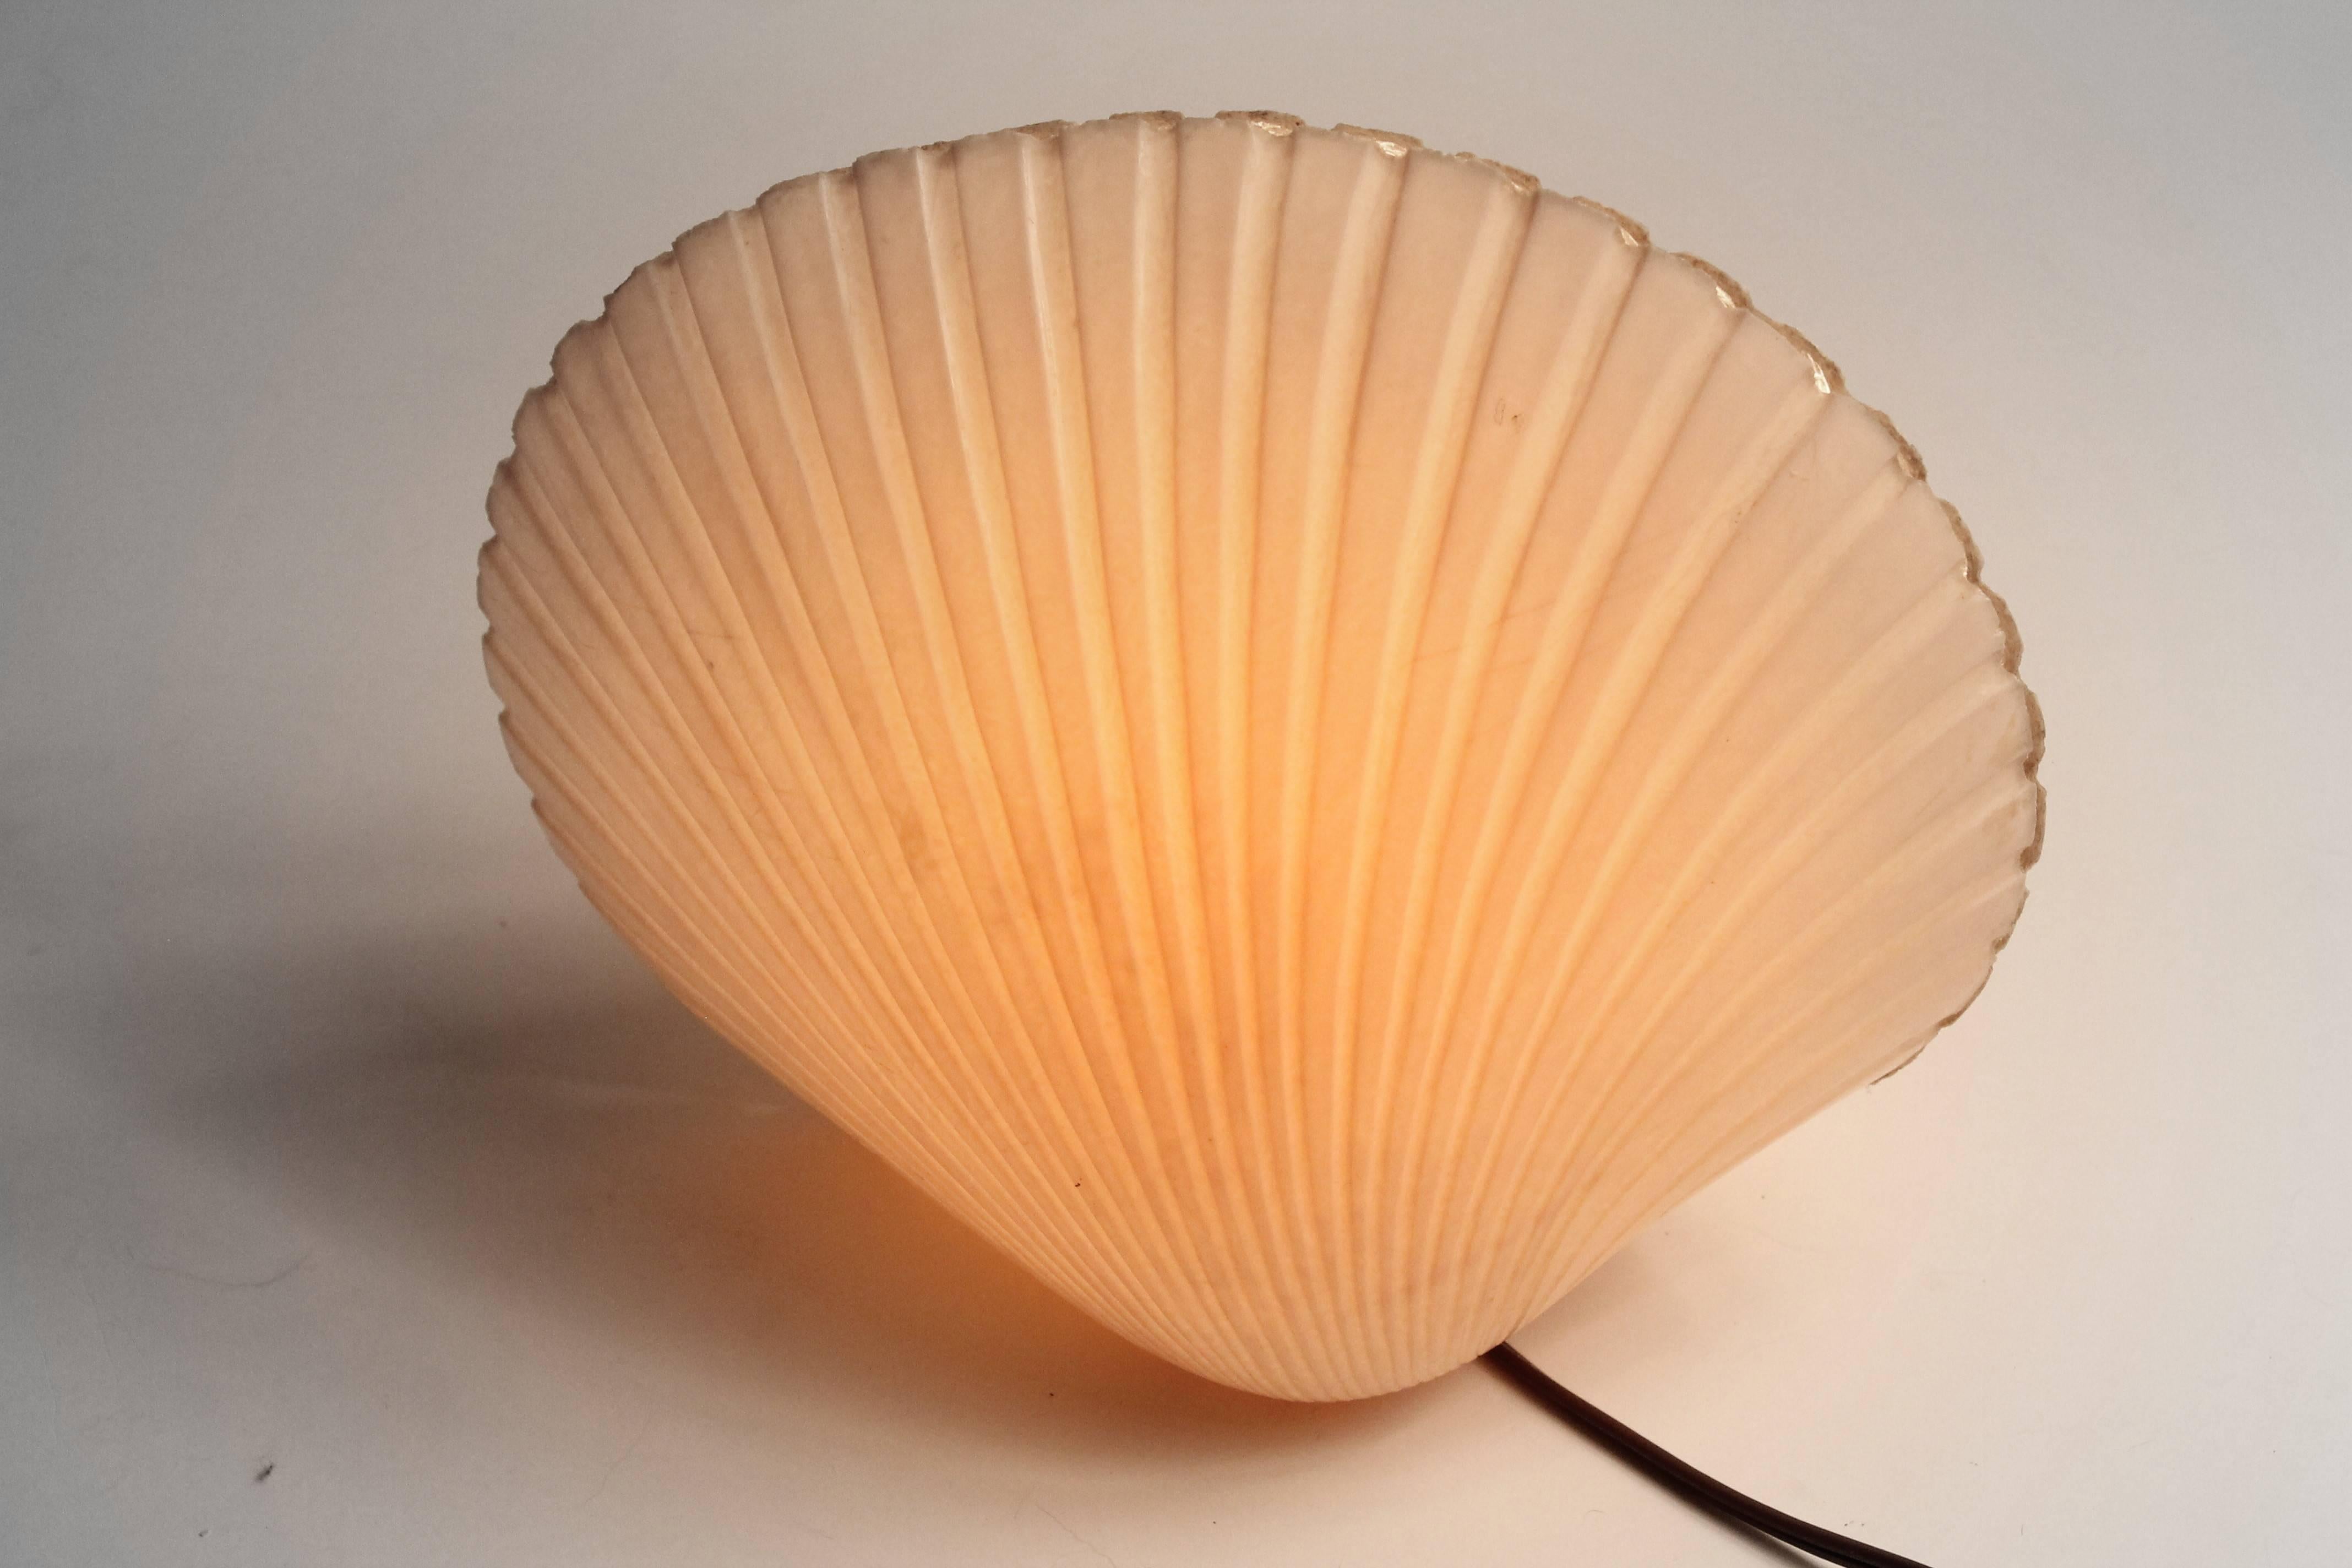 French Andre Cazenave Fiberglass Shell Table Lamp for Atelier A France Vintage, 1970s